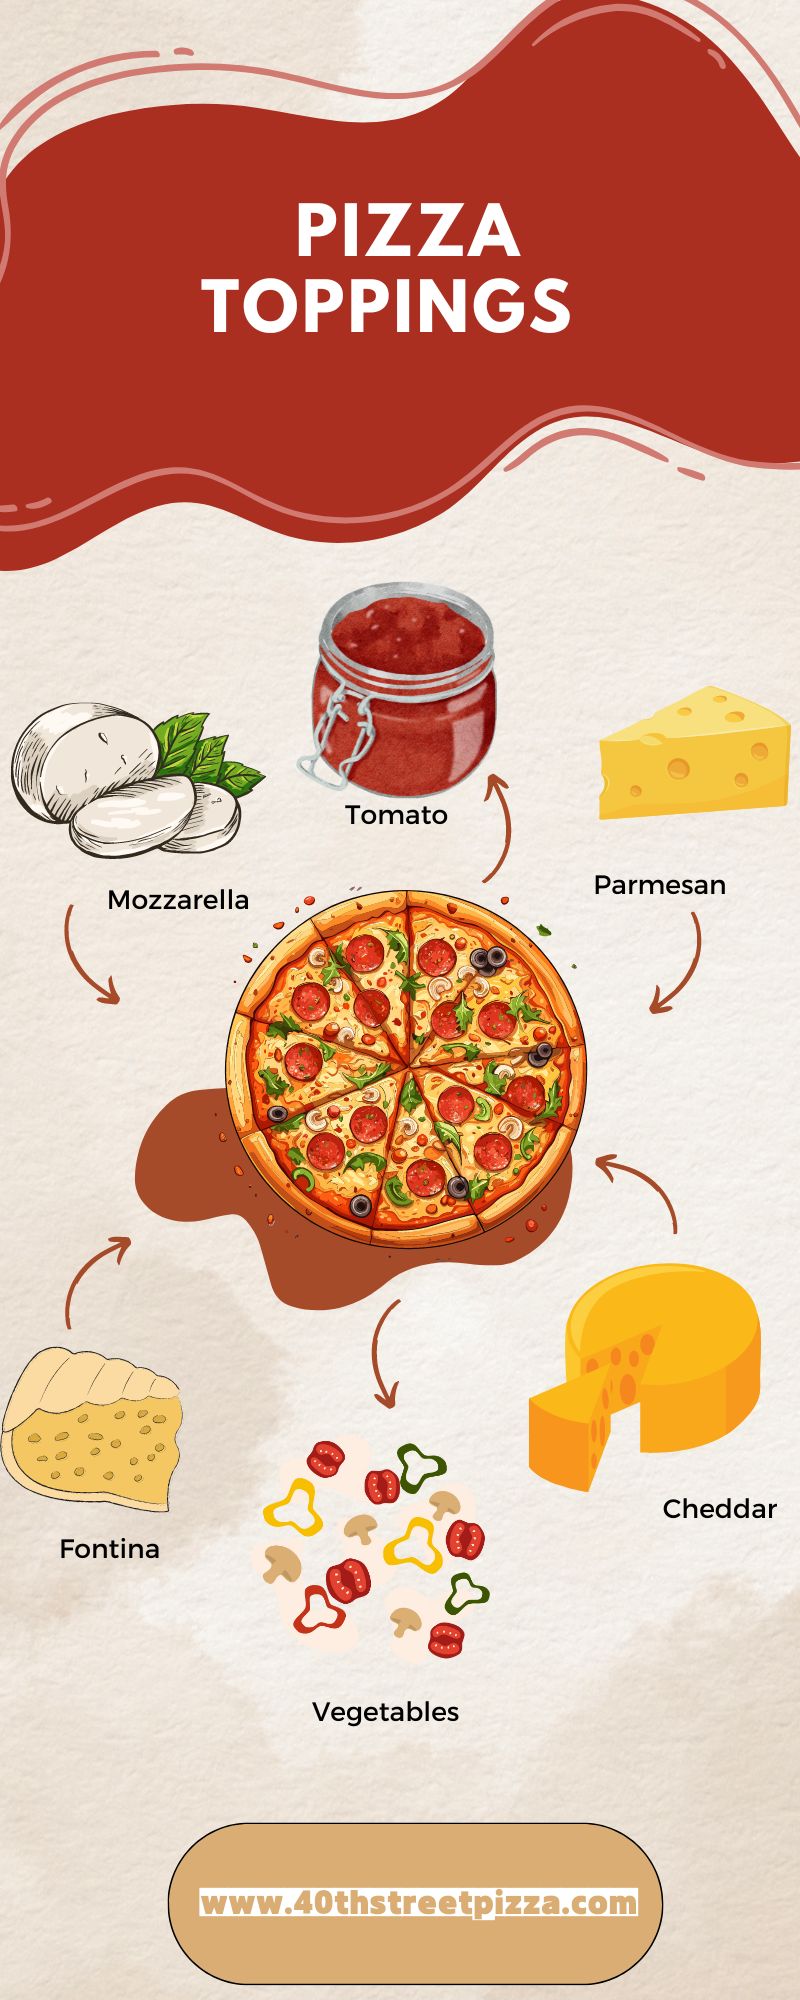 Pizza Toppings infographic